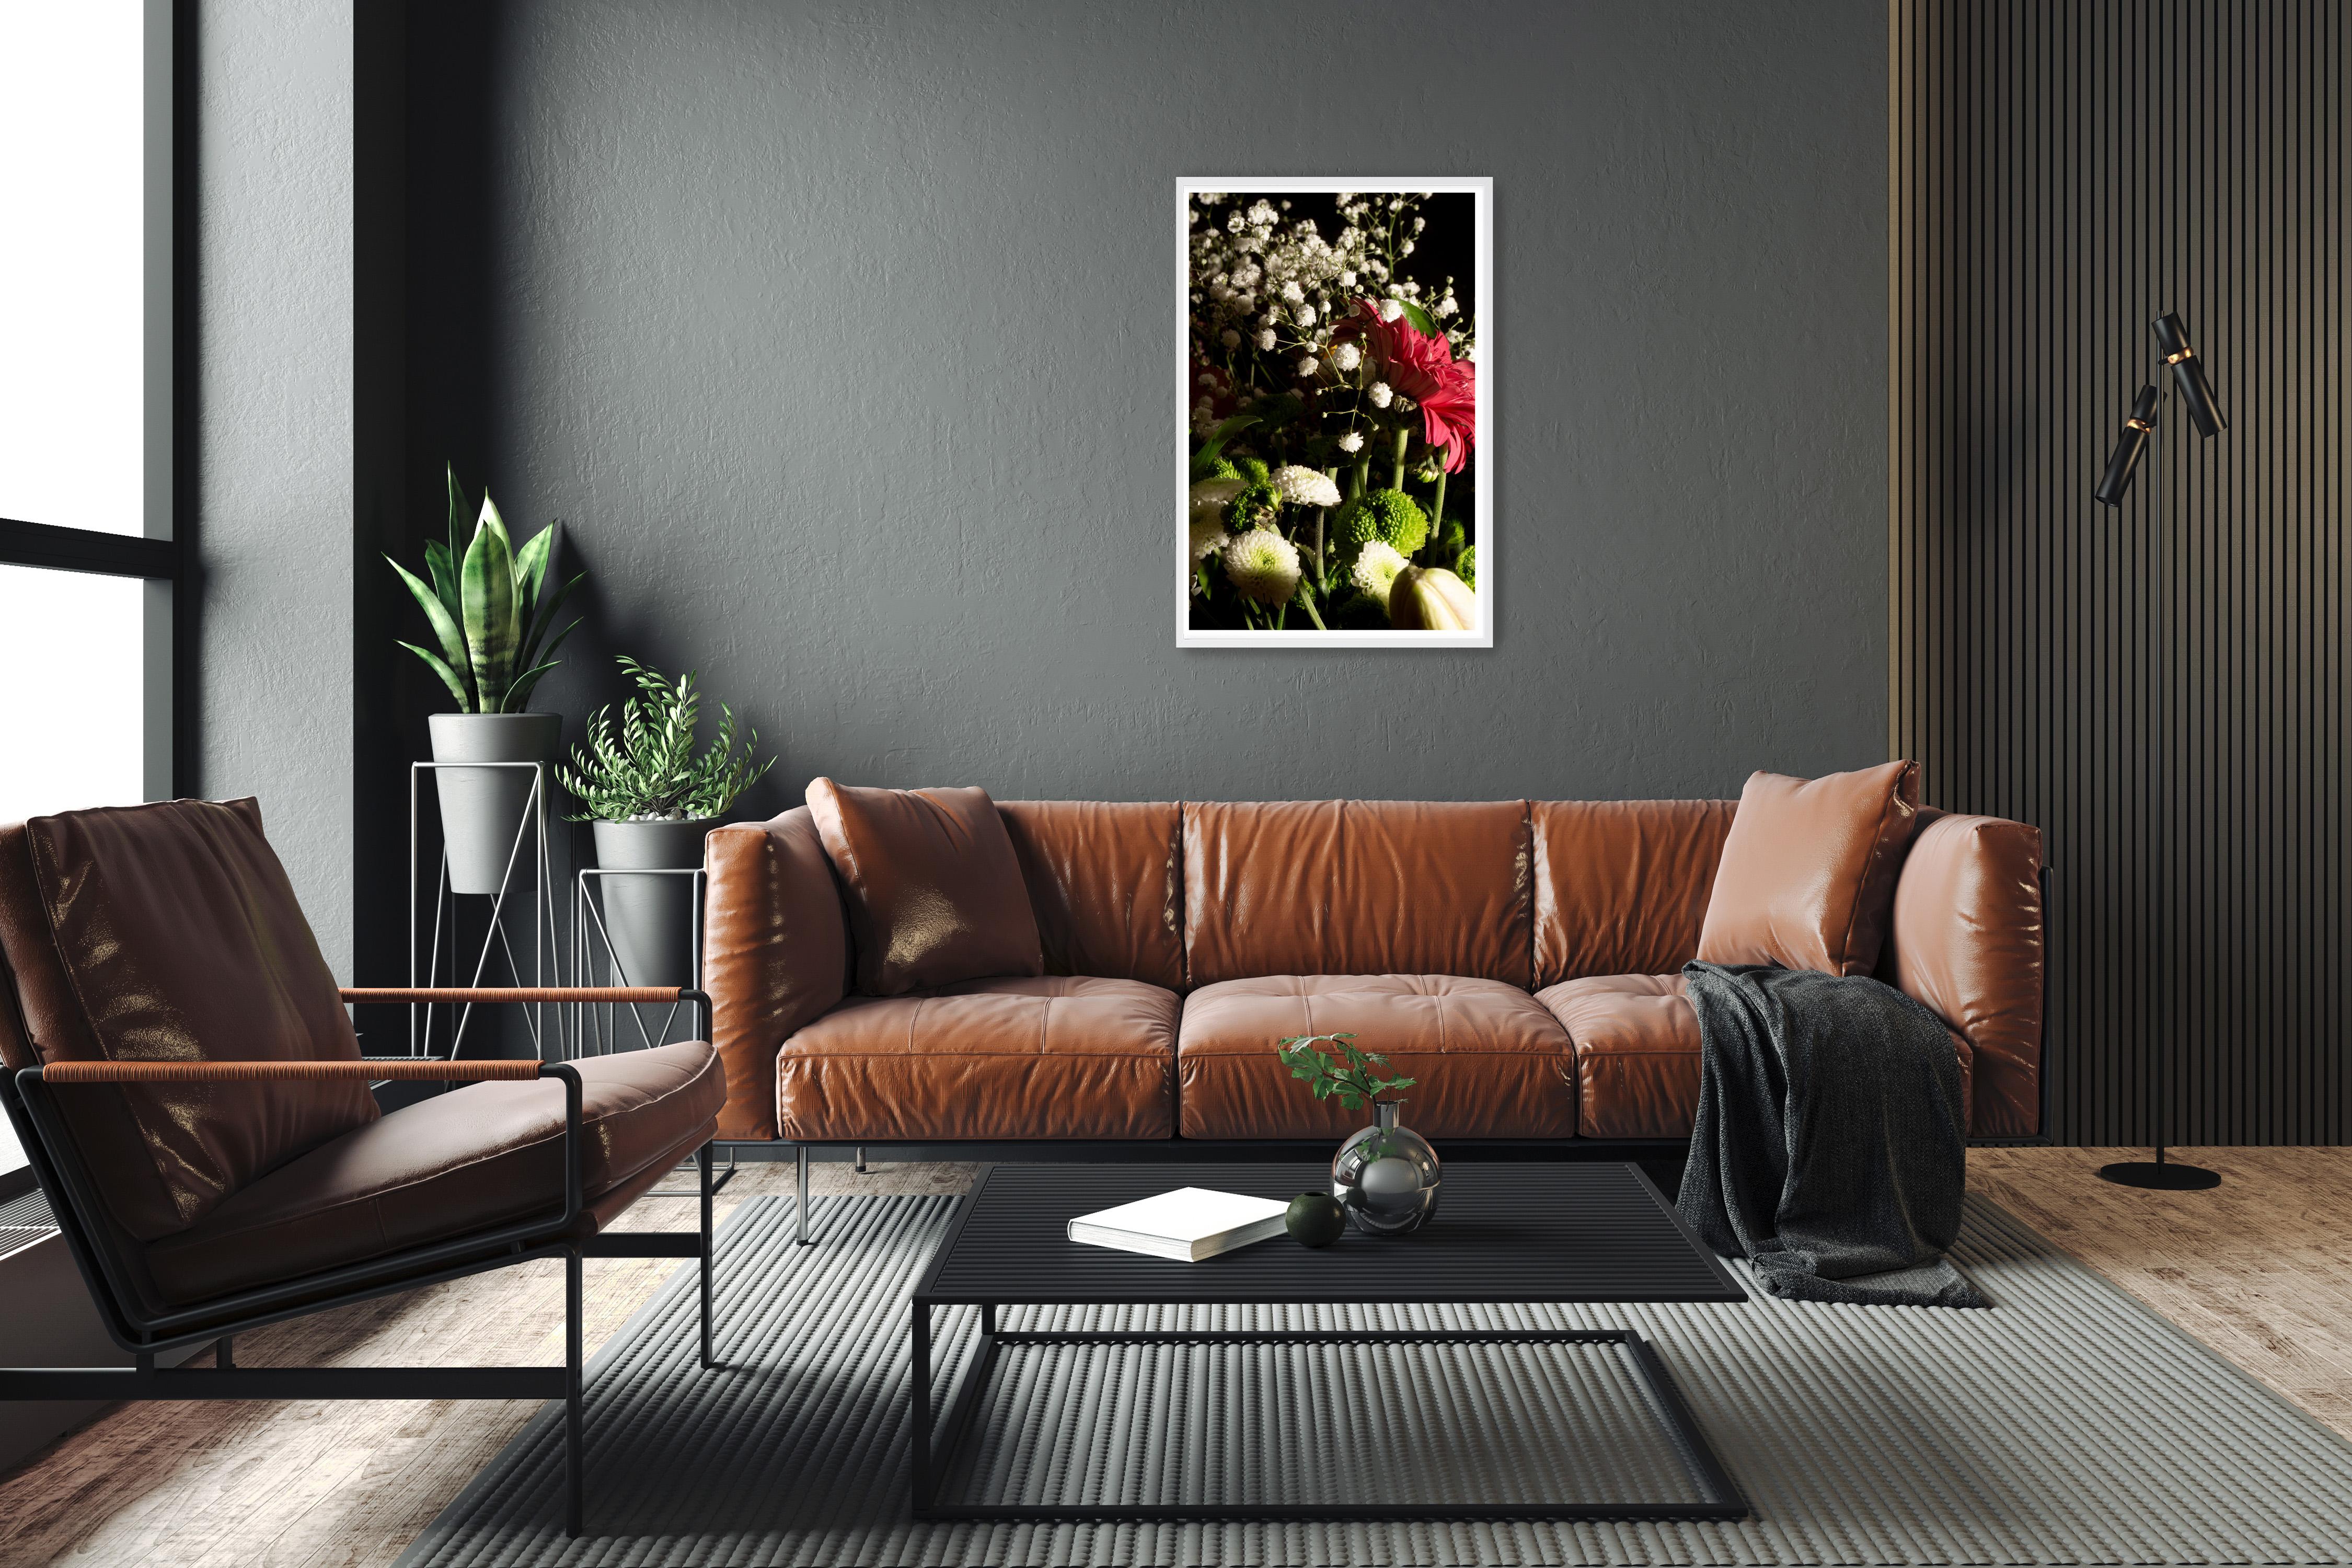 Summer Flowers Bouquet on Black Background, Limited Edition Still Life, Giclee - Photorealist Print by Kind of Cyan